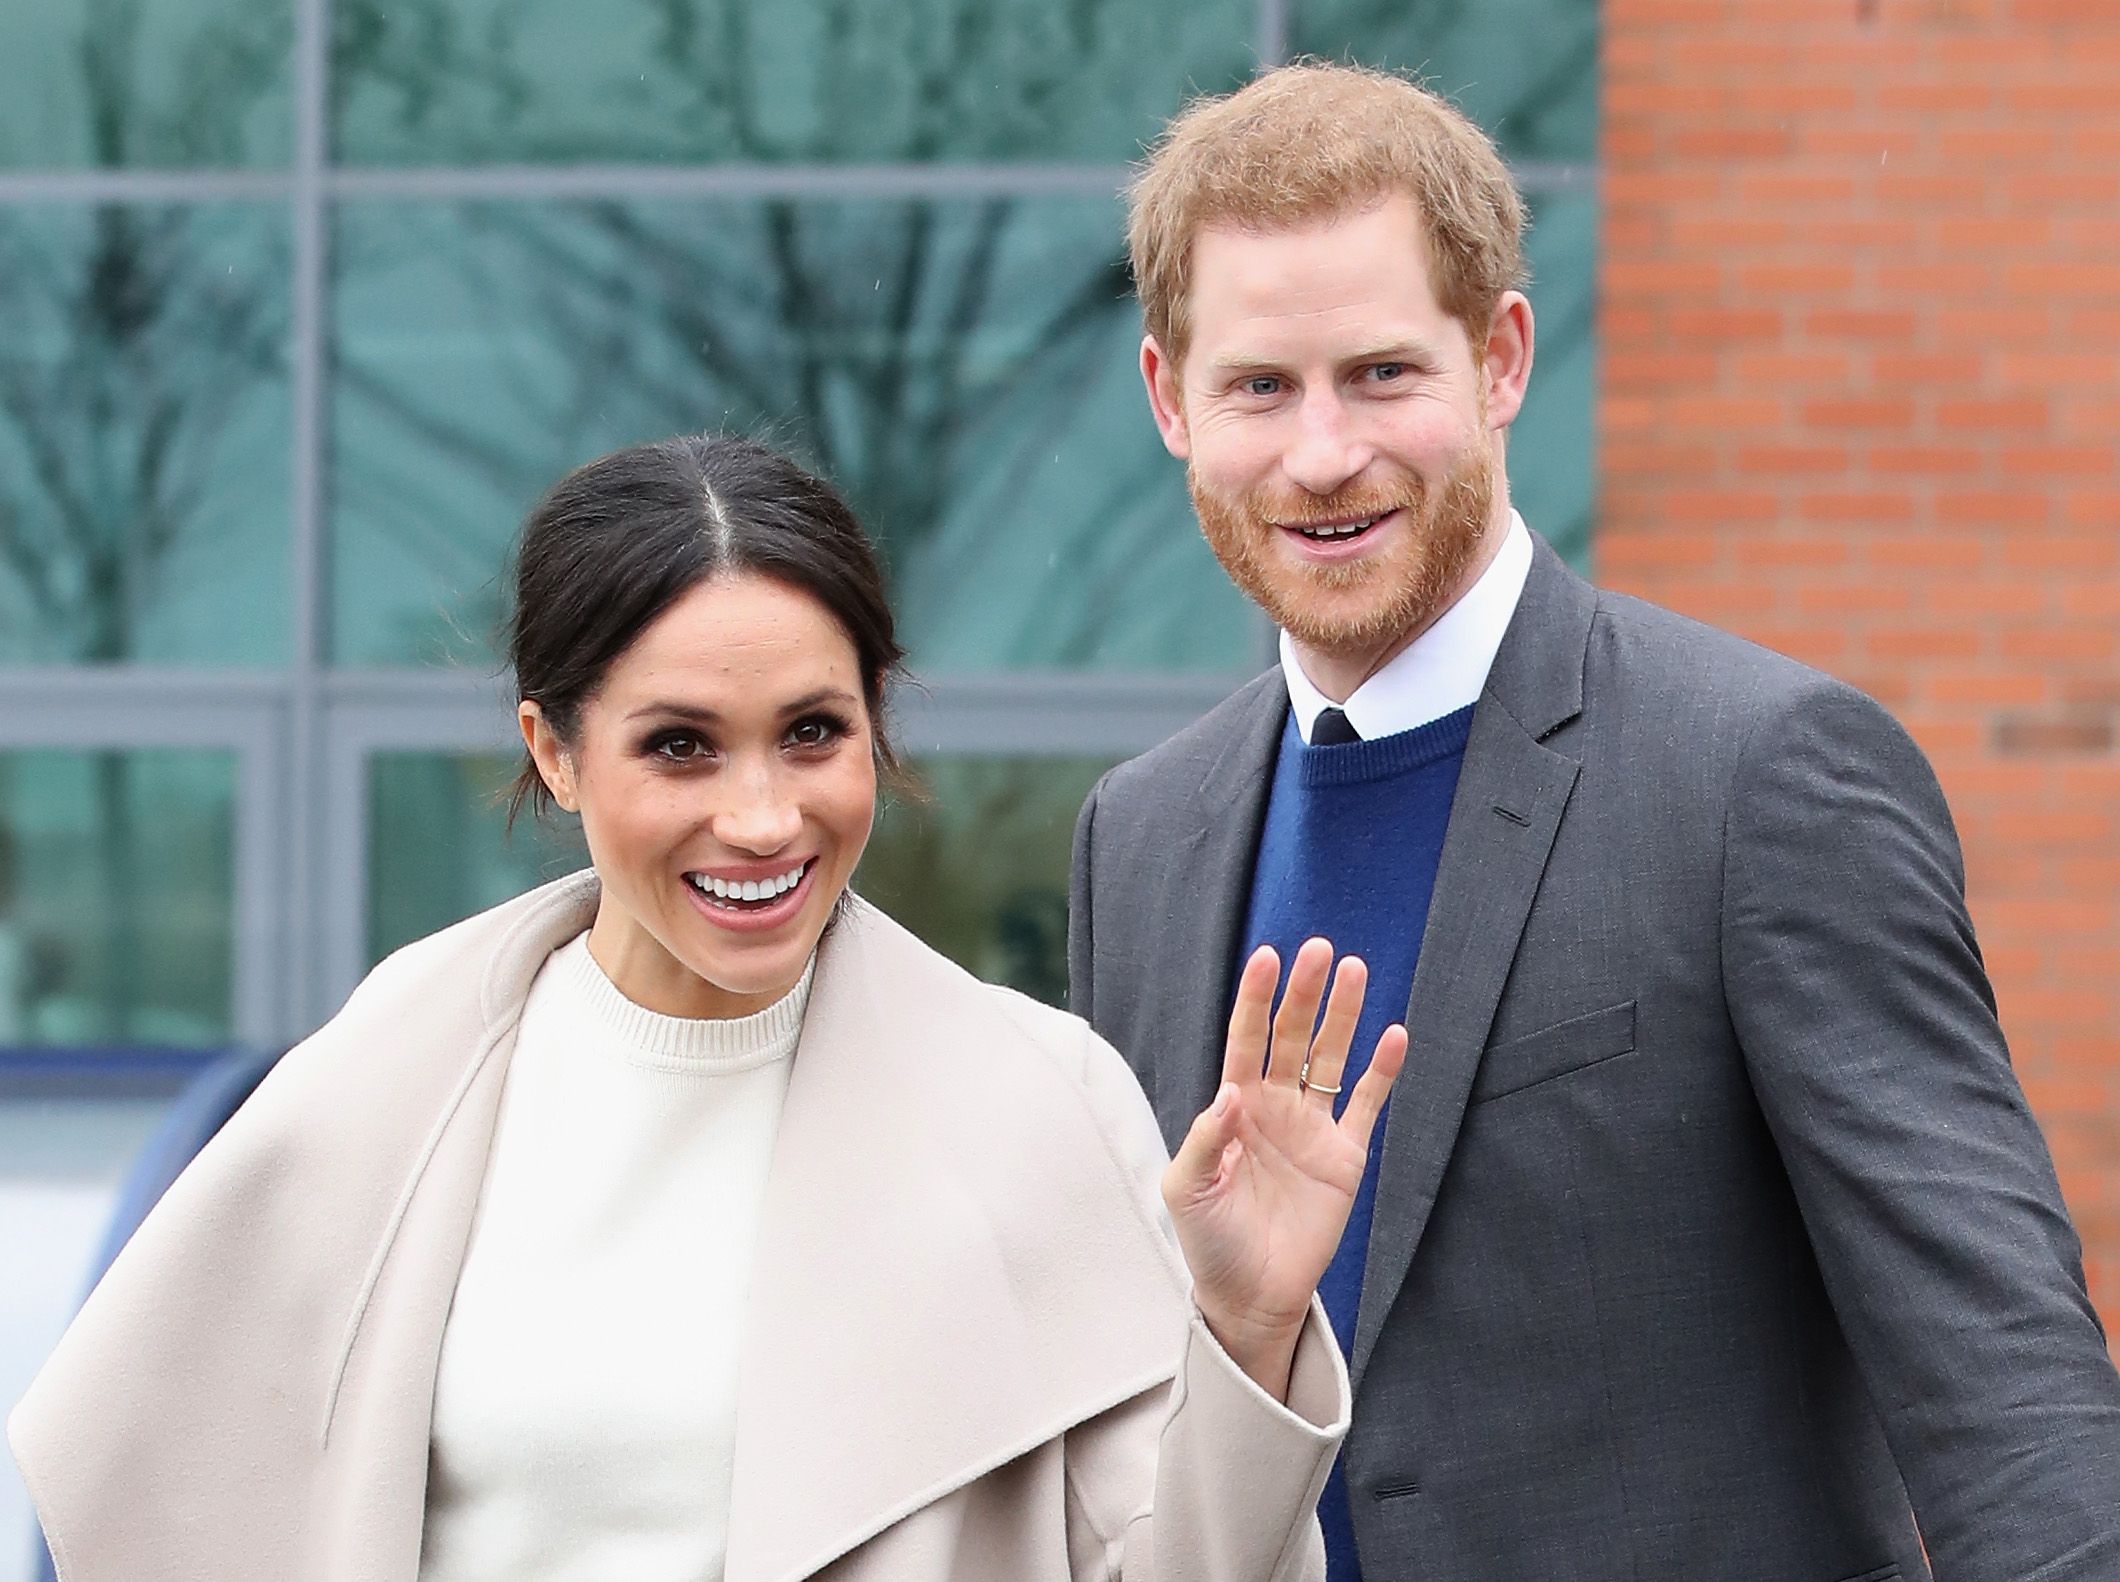 Prince Harry and Meghan Markle depart from Catalyst Inc, Northern Irelands next generation science park on March 23, 2018 in Belfast, Nothern Ireland | Photo: Getty Images